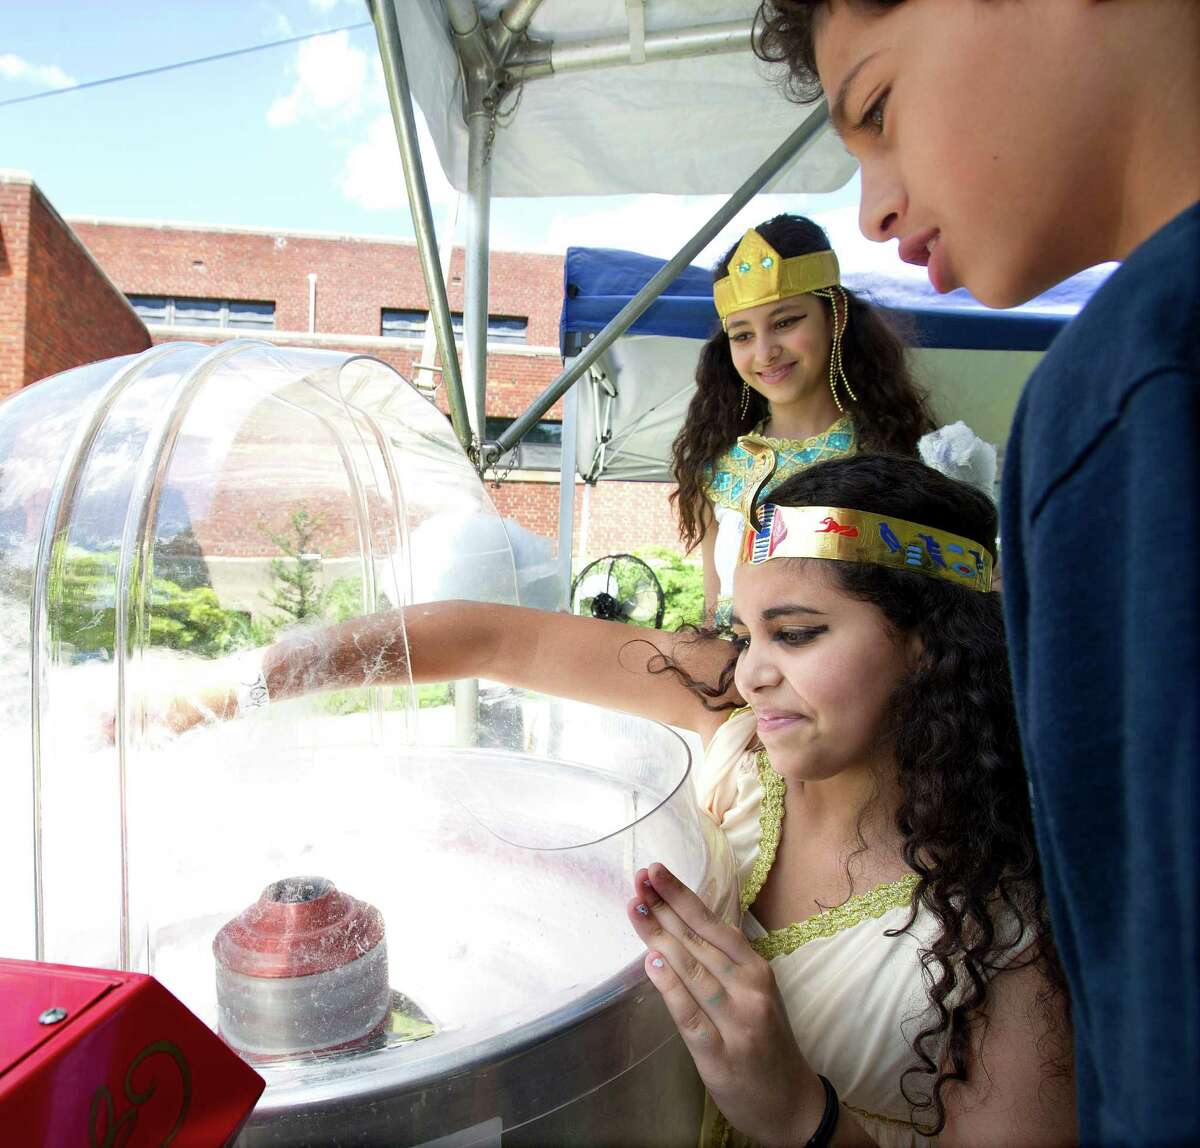 From back to front, Isabella Sorial, 12, Michelle Awad, 12, and Daniel Sorial, 10, make cotton candy during "A Taste of Egypt" at St. Peter and St. Andrew Coptic Orthodox Church in Stamford, Conn., on Saturday, June 15, 2013.